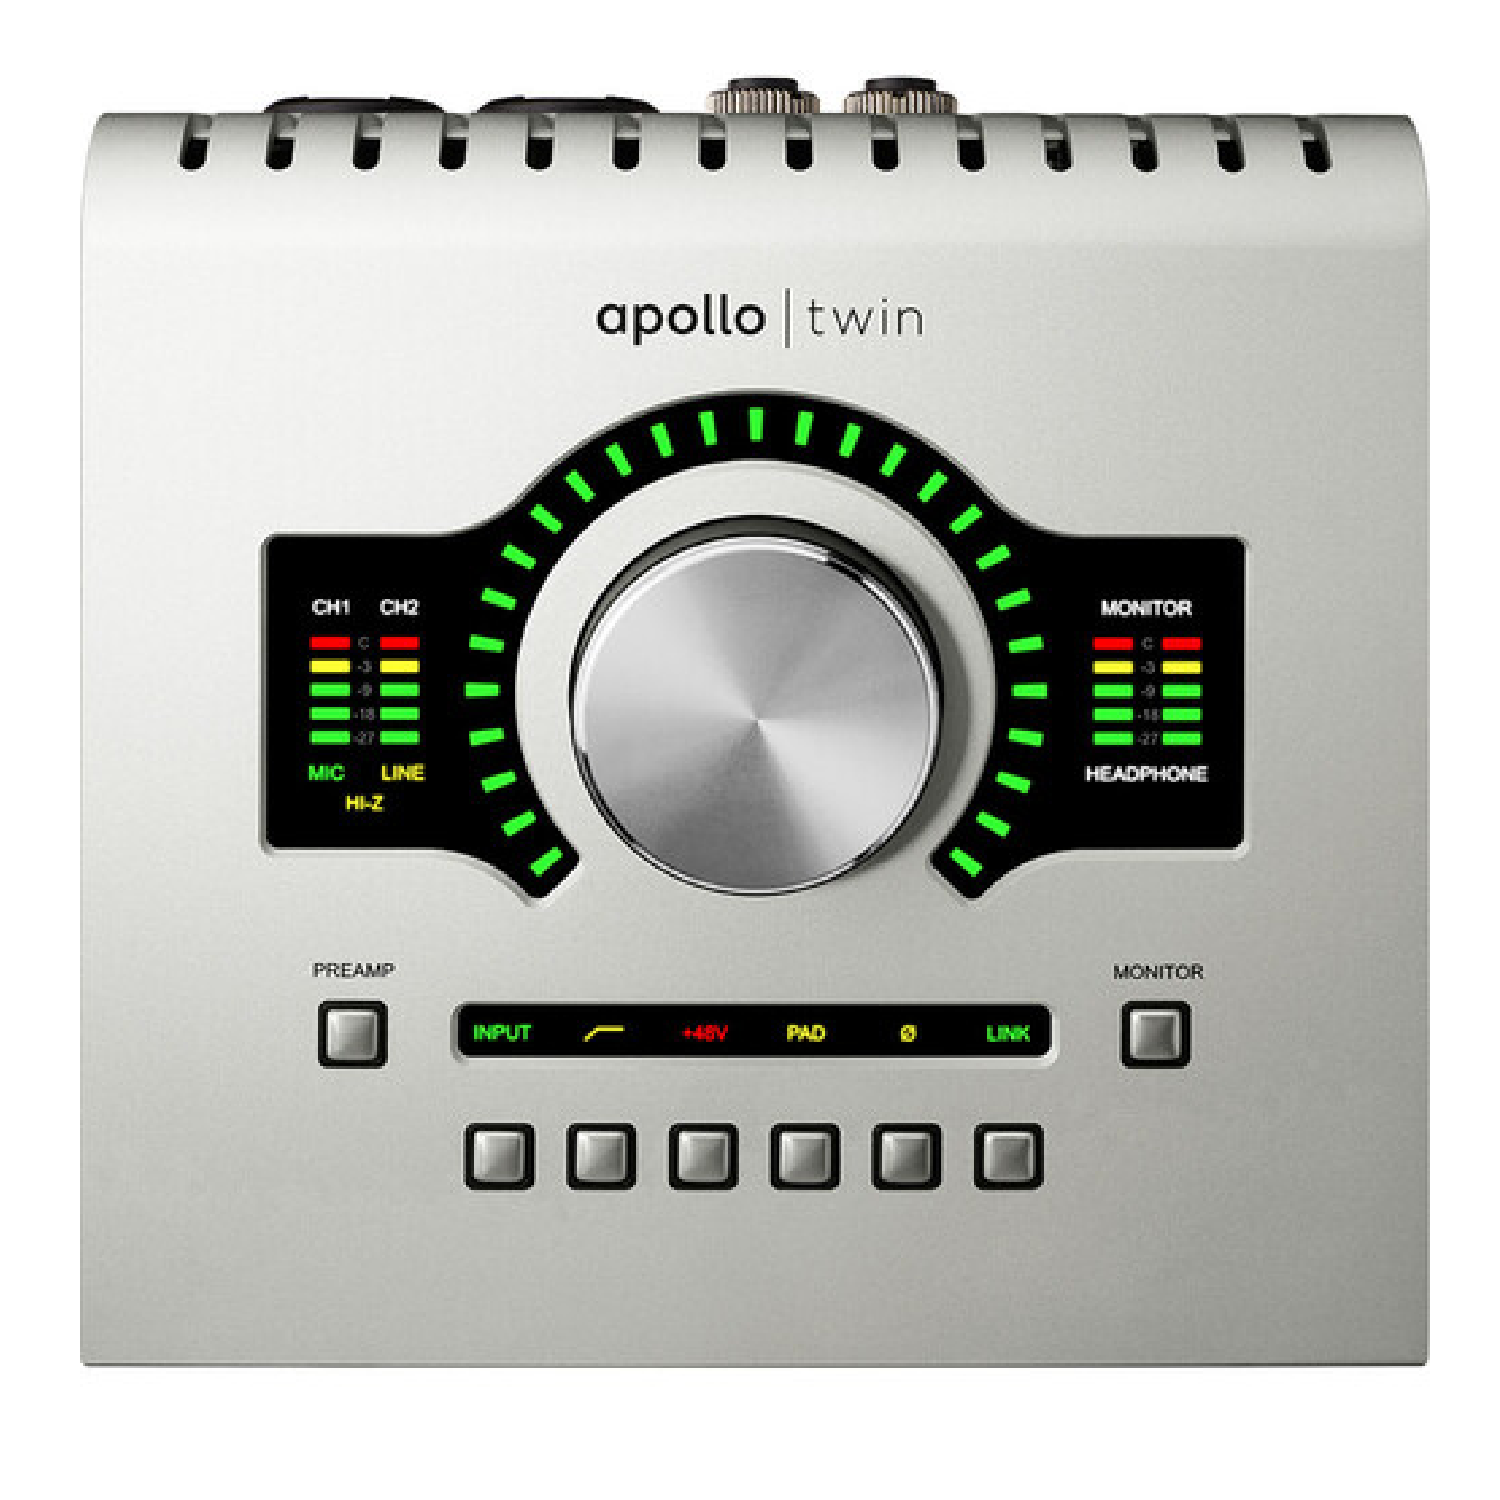 10 x 6 USB Audio Interface with Real-Time UAD Processing for Windows   Apollo Twin USB Heritage Series w/ DUO Processing (Win) universal audio